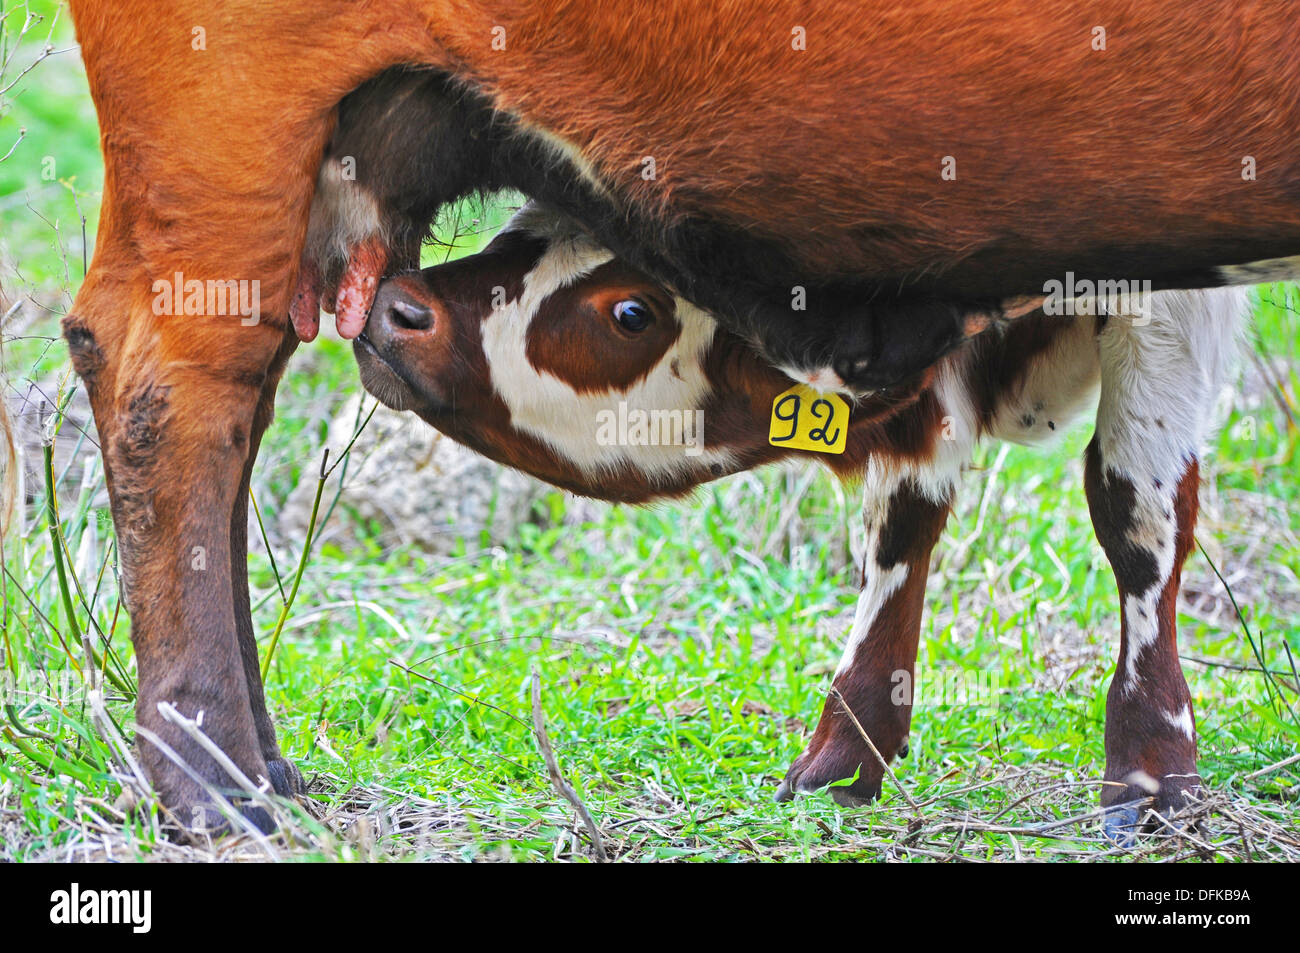 Calf  suckle from his cow mother Stock Photo